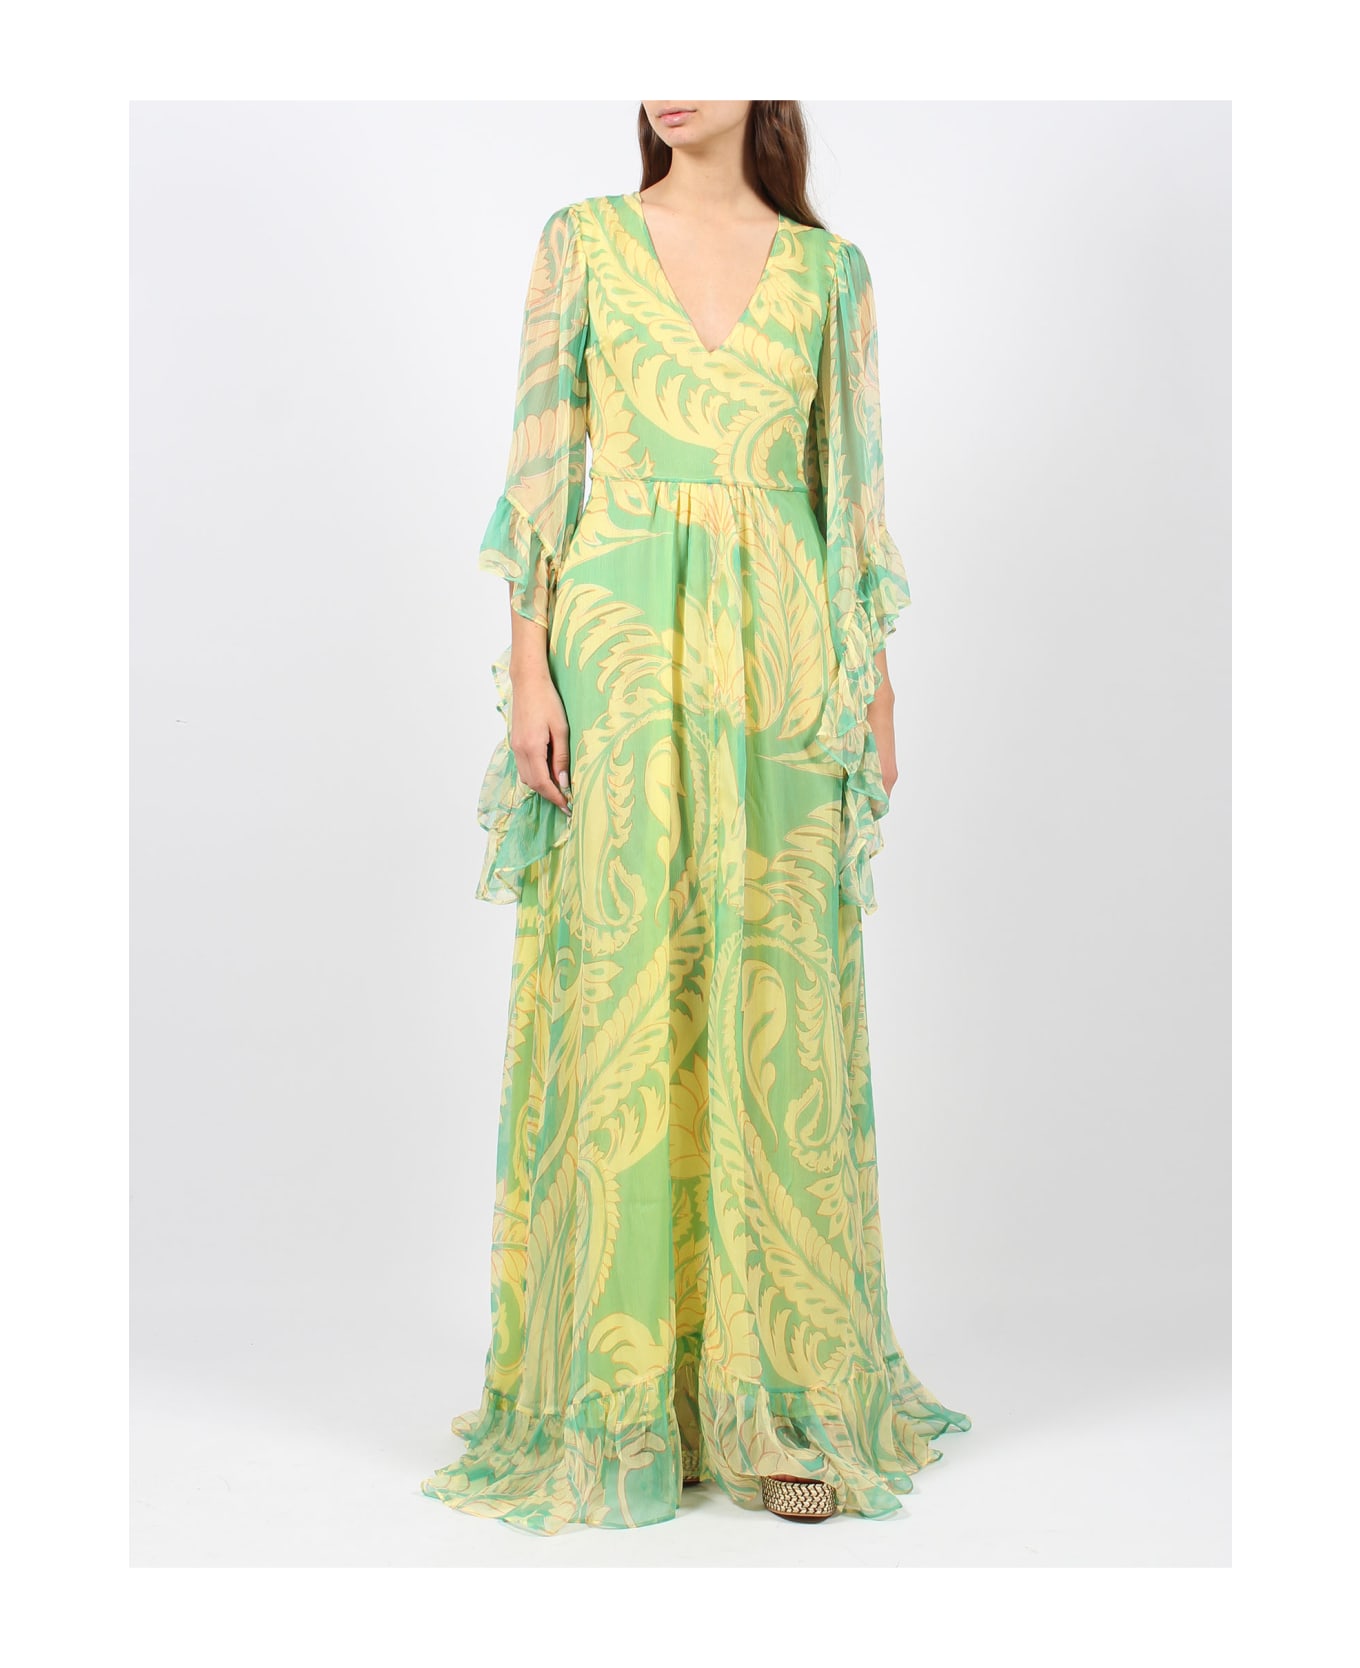 Etro Printed Tulle Dress - Green